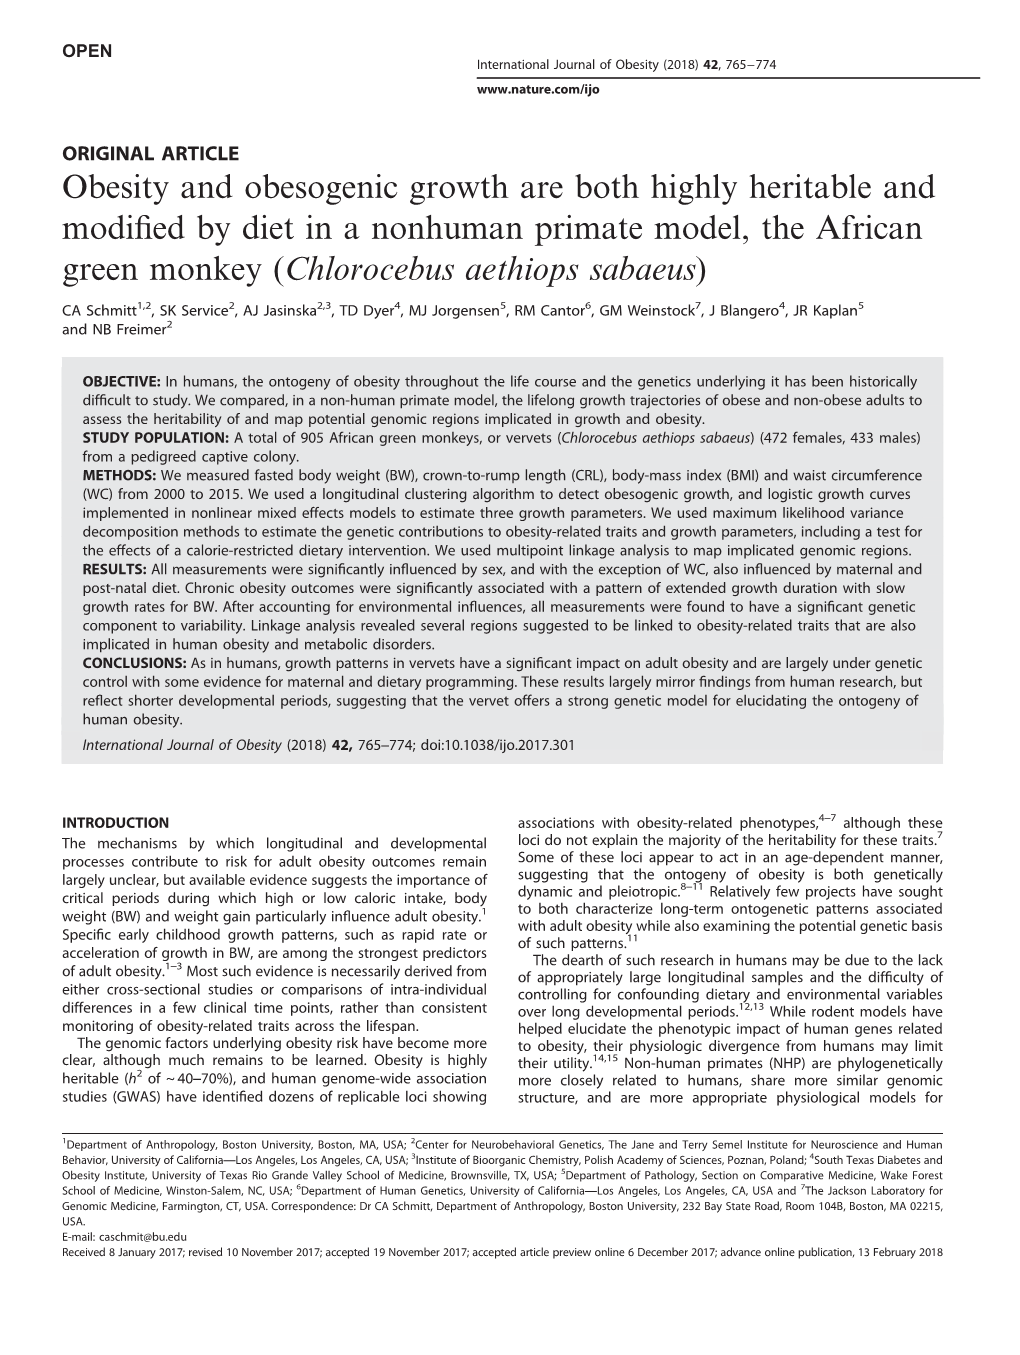 Obesity and Obesogenic Growth Are Both Highly Heritable and Modified by Diet in a Nonhuman Primate Model, the African Green Monk